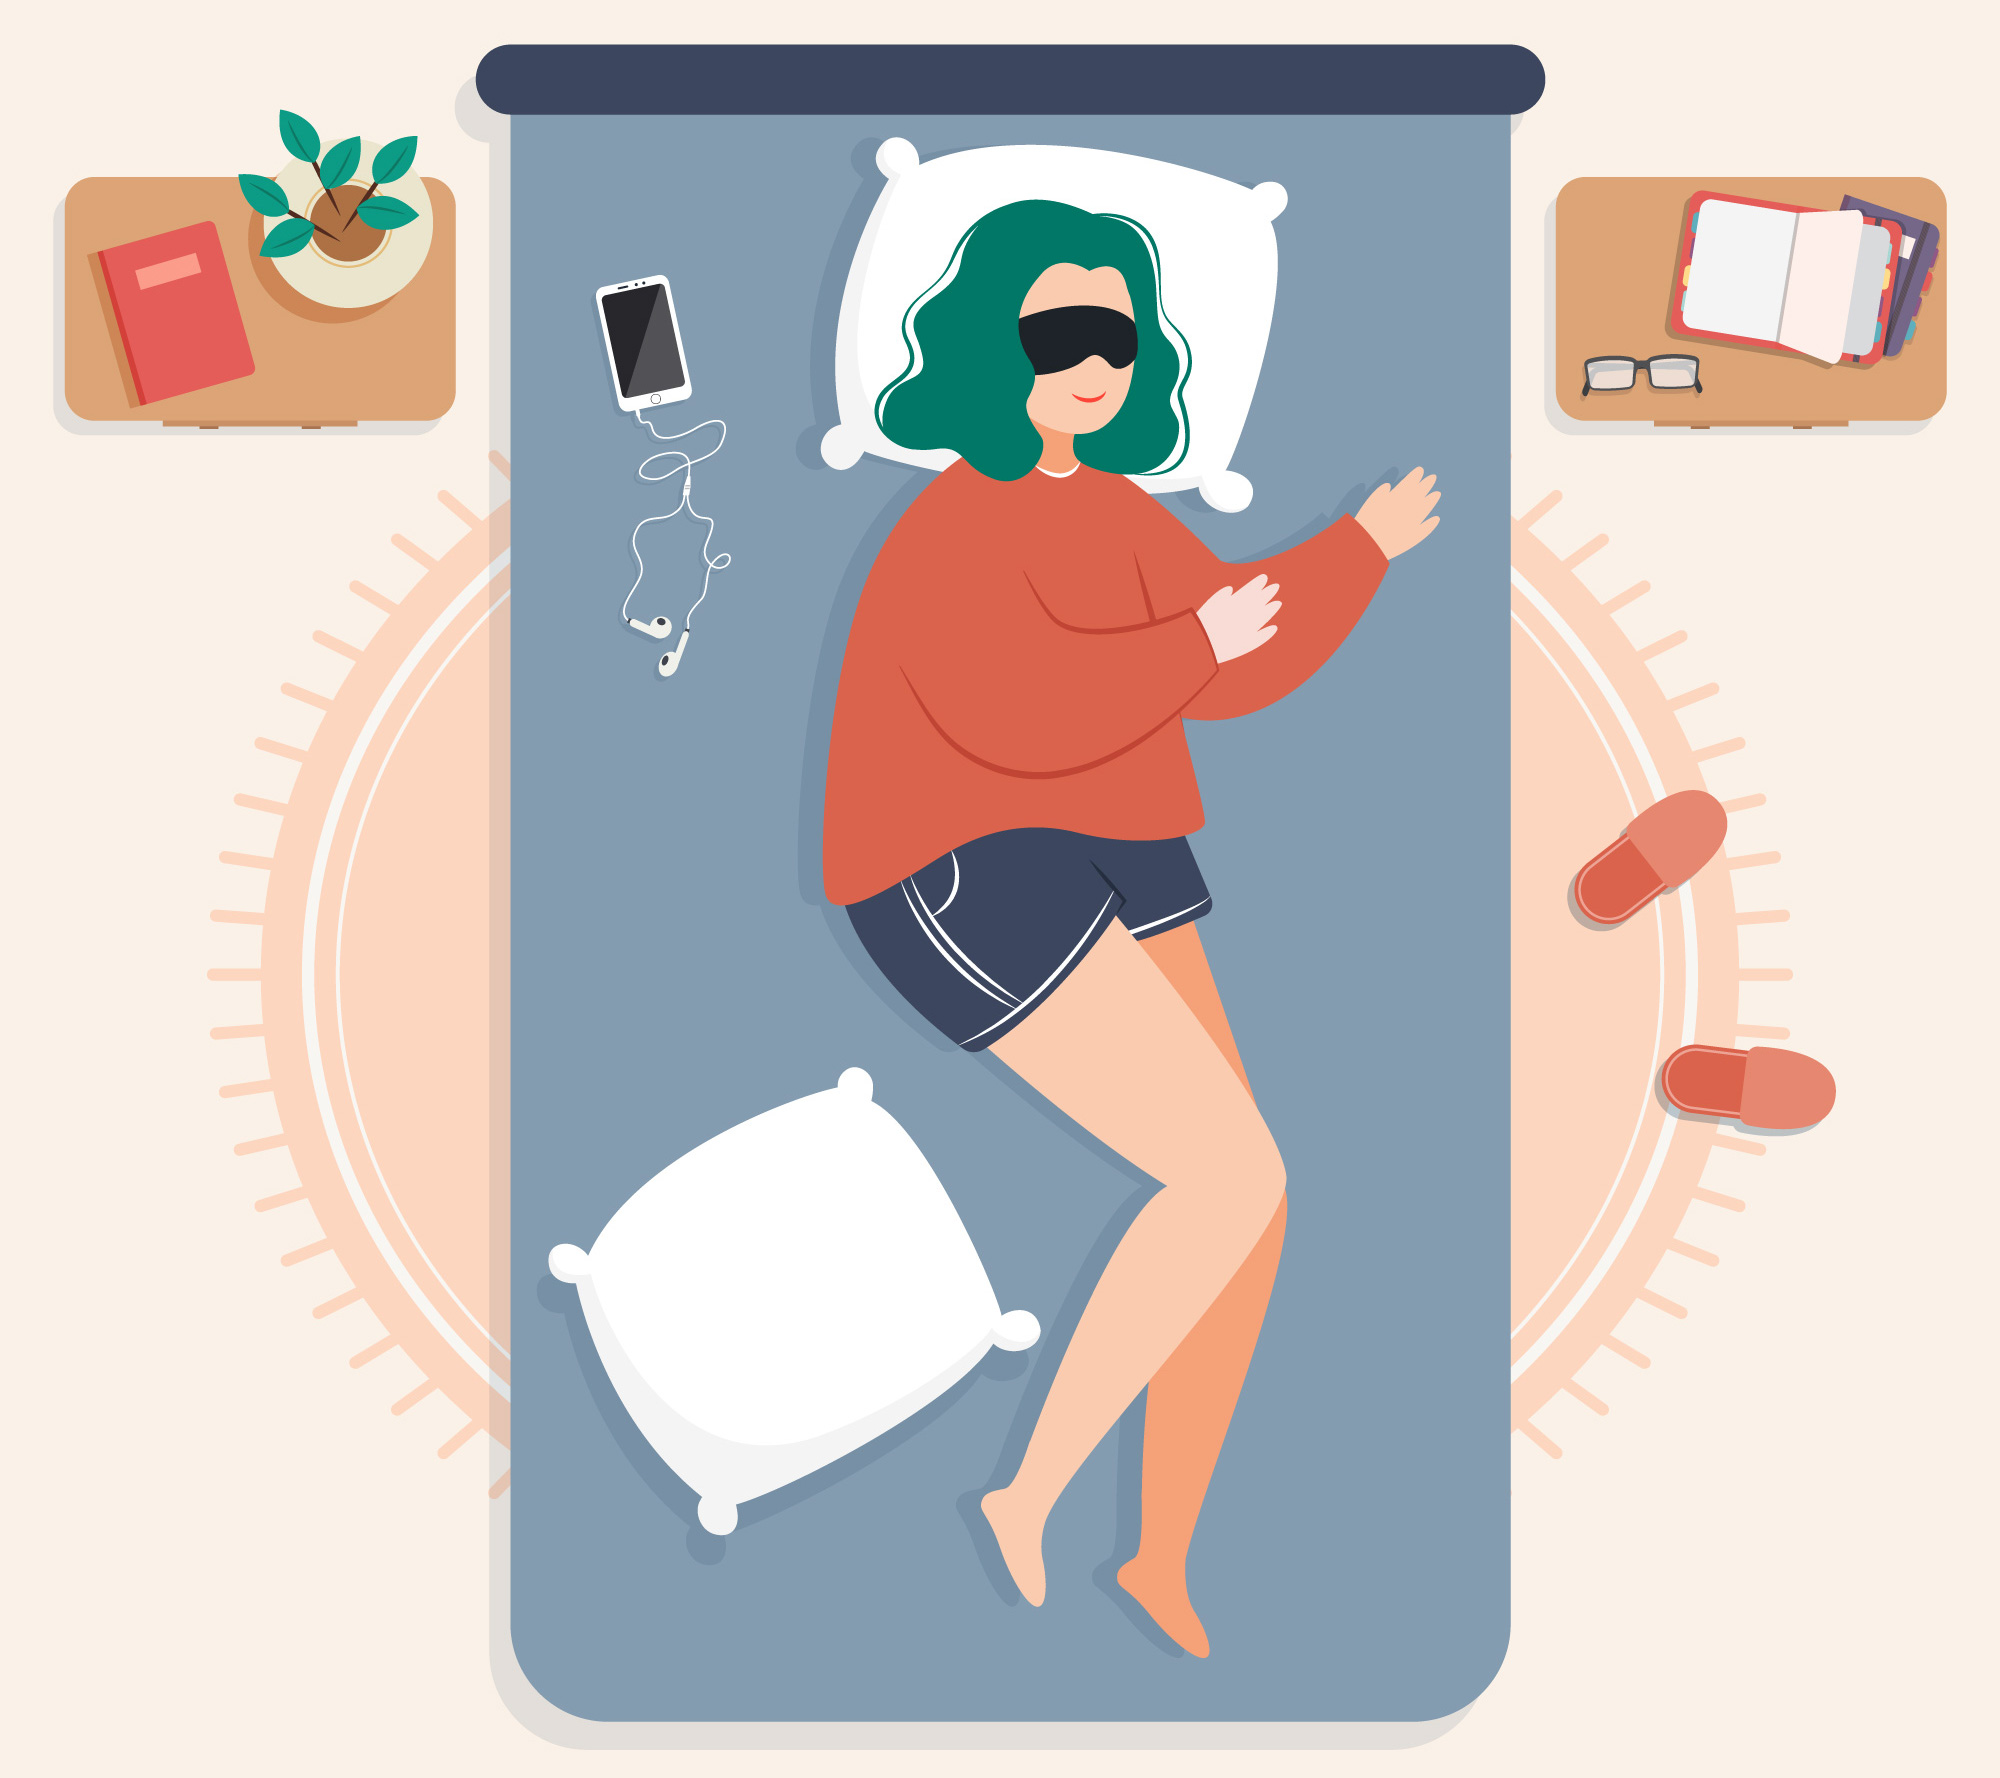 vector image of a young girl sleeping alone on the bed